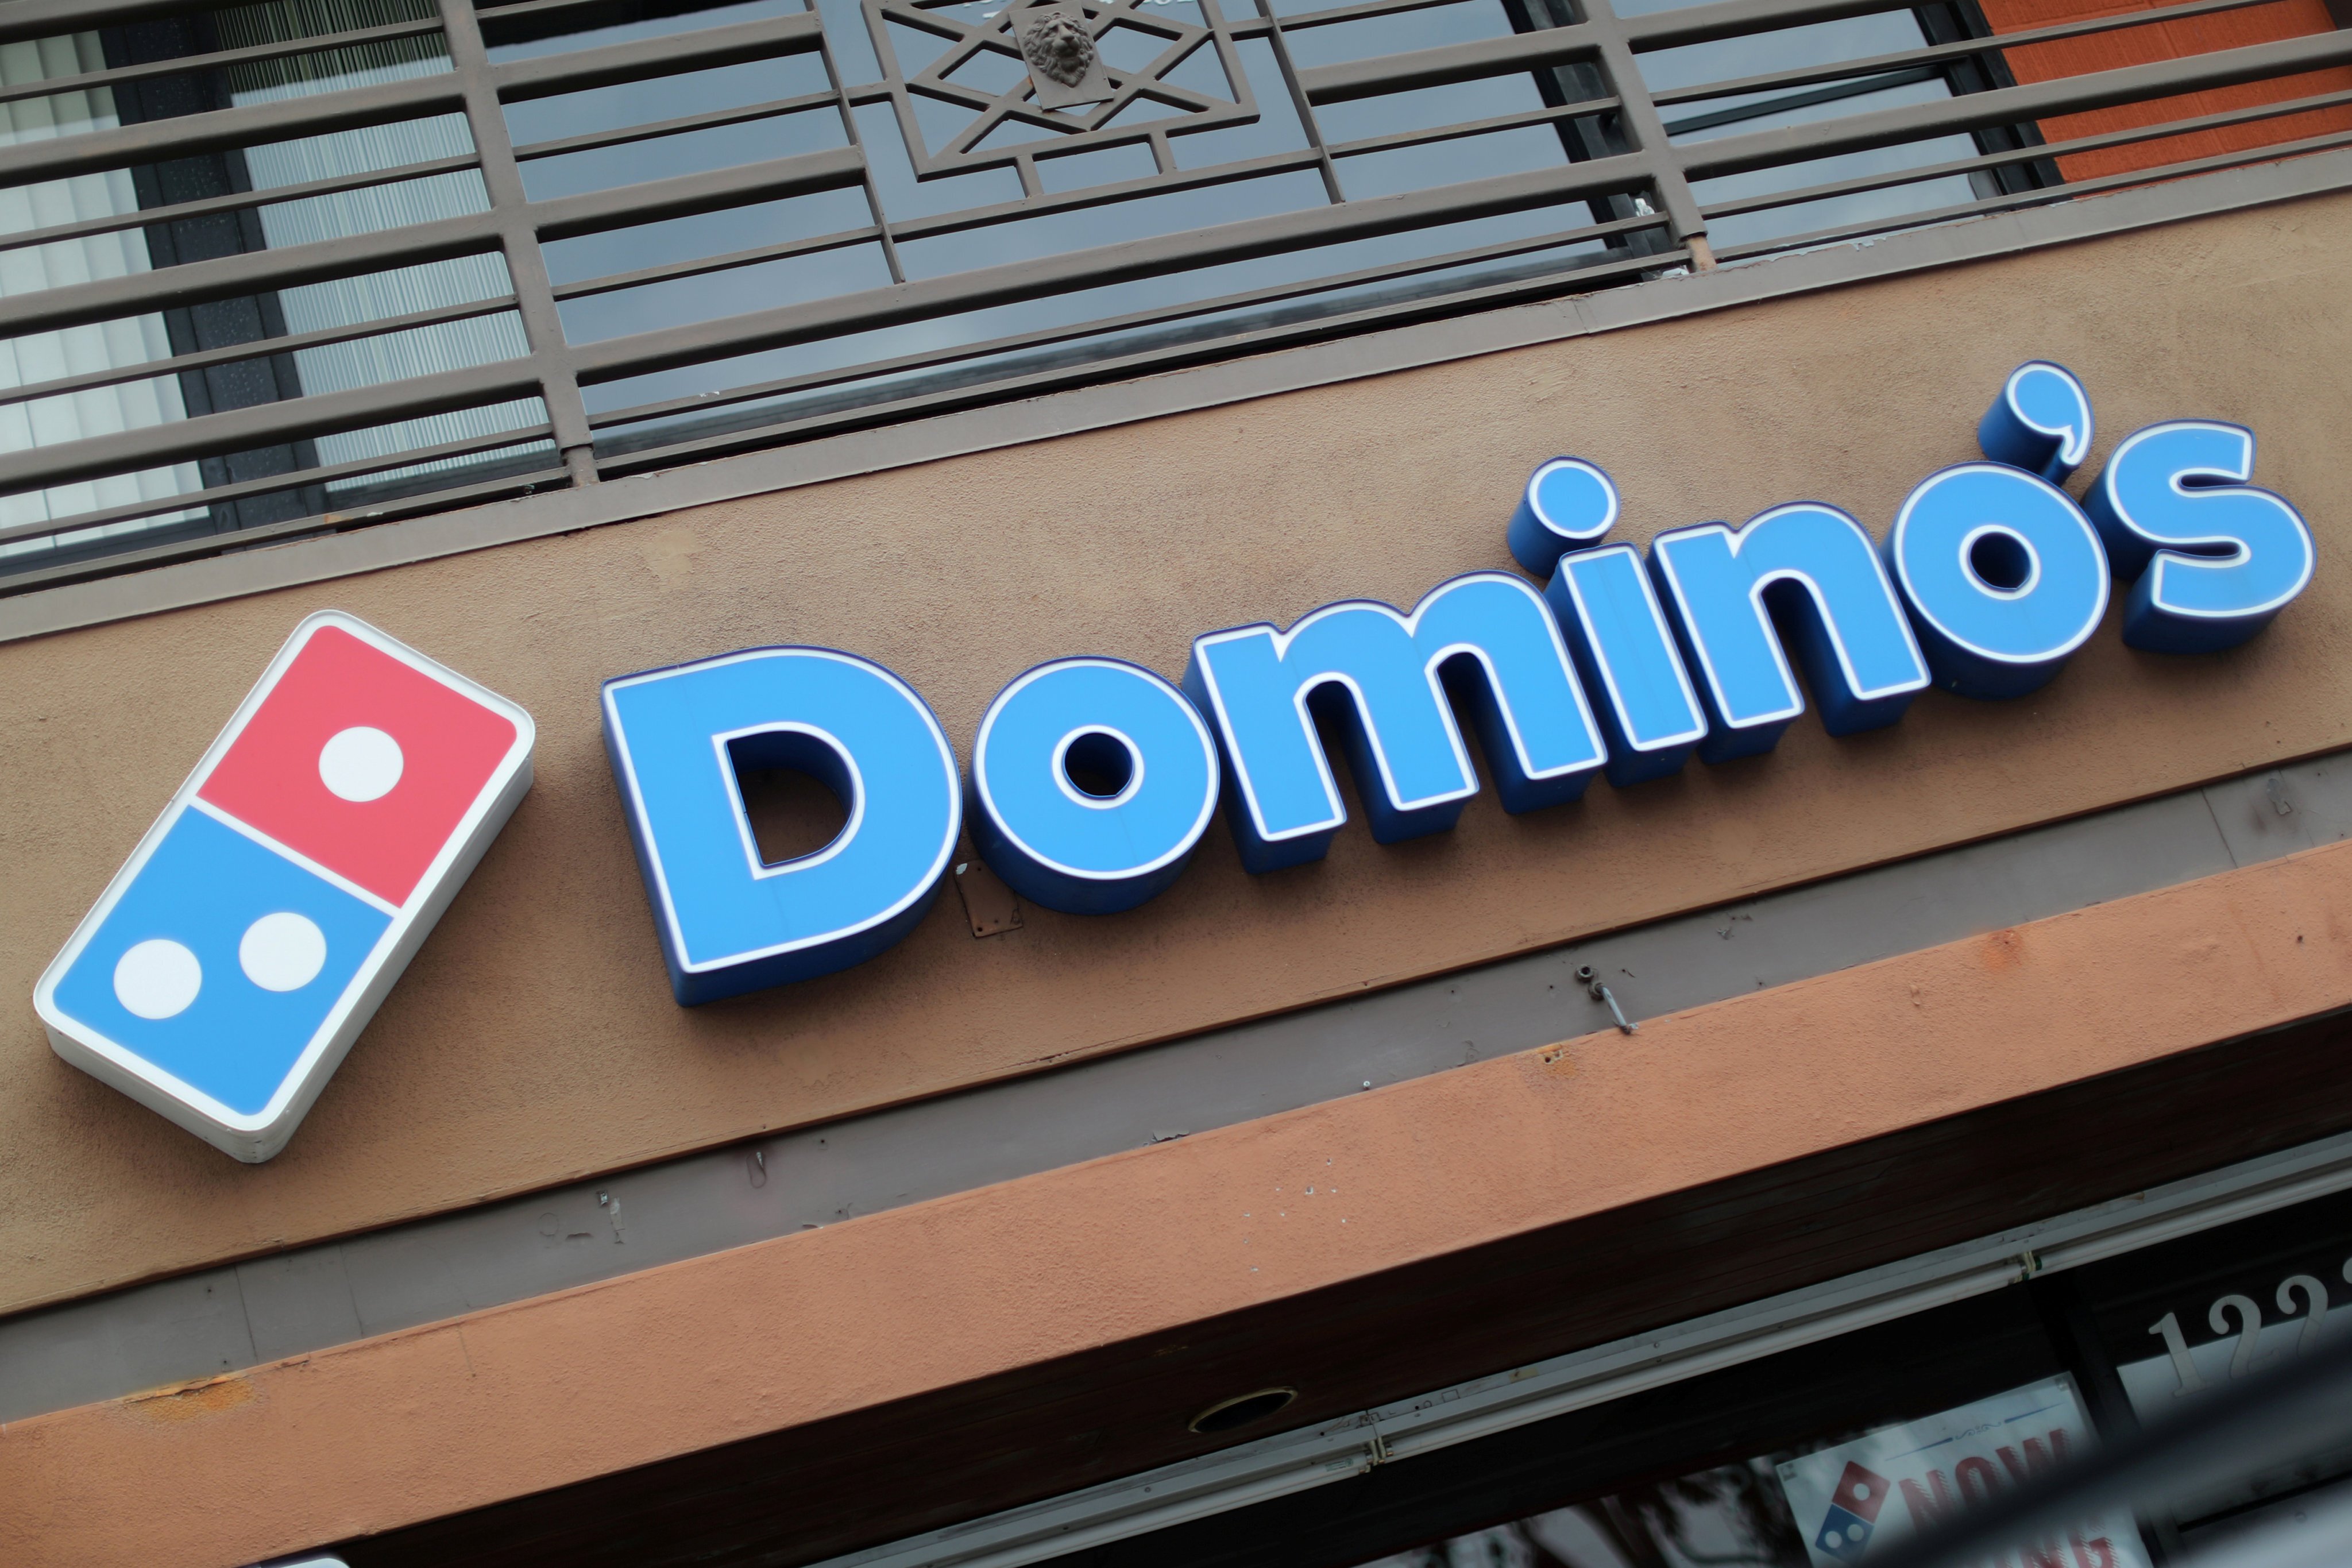 DPC Dash, which operates Domino’s in China, said it plans to use the proceeds of its IPO to open 300 new stores in the country by 2023. Photo: Reuters